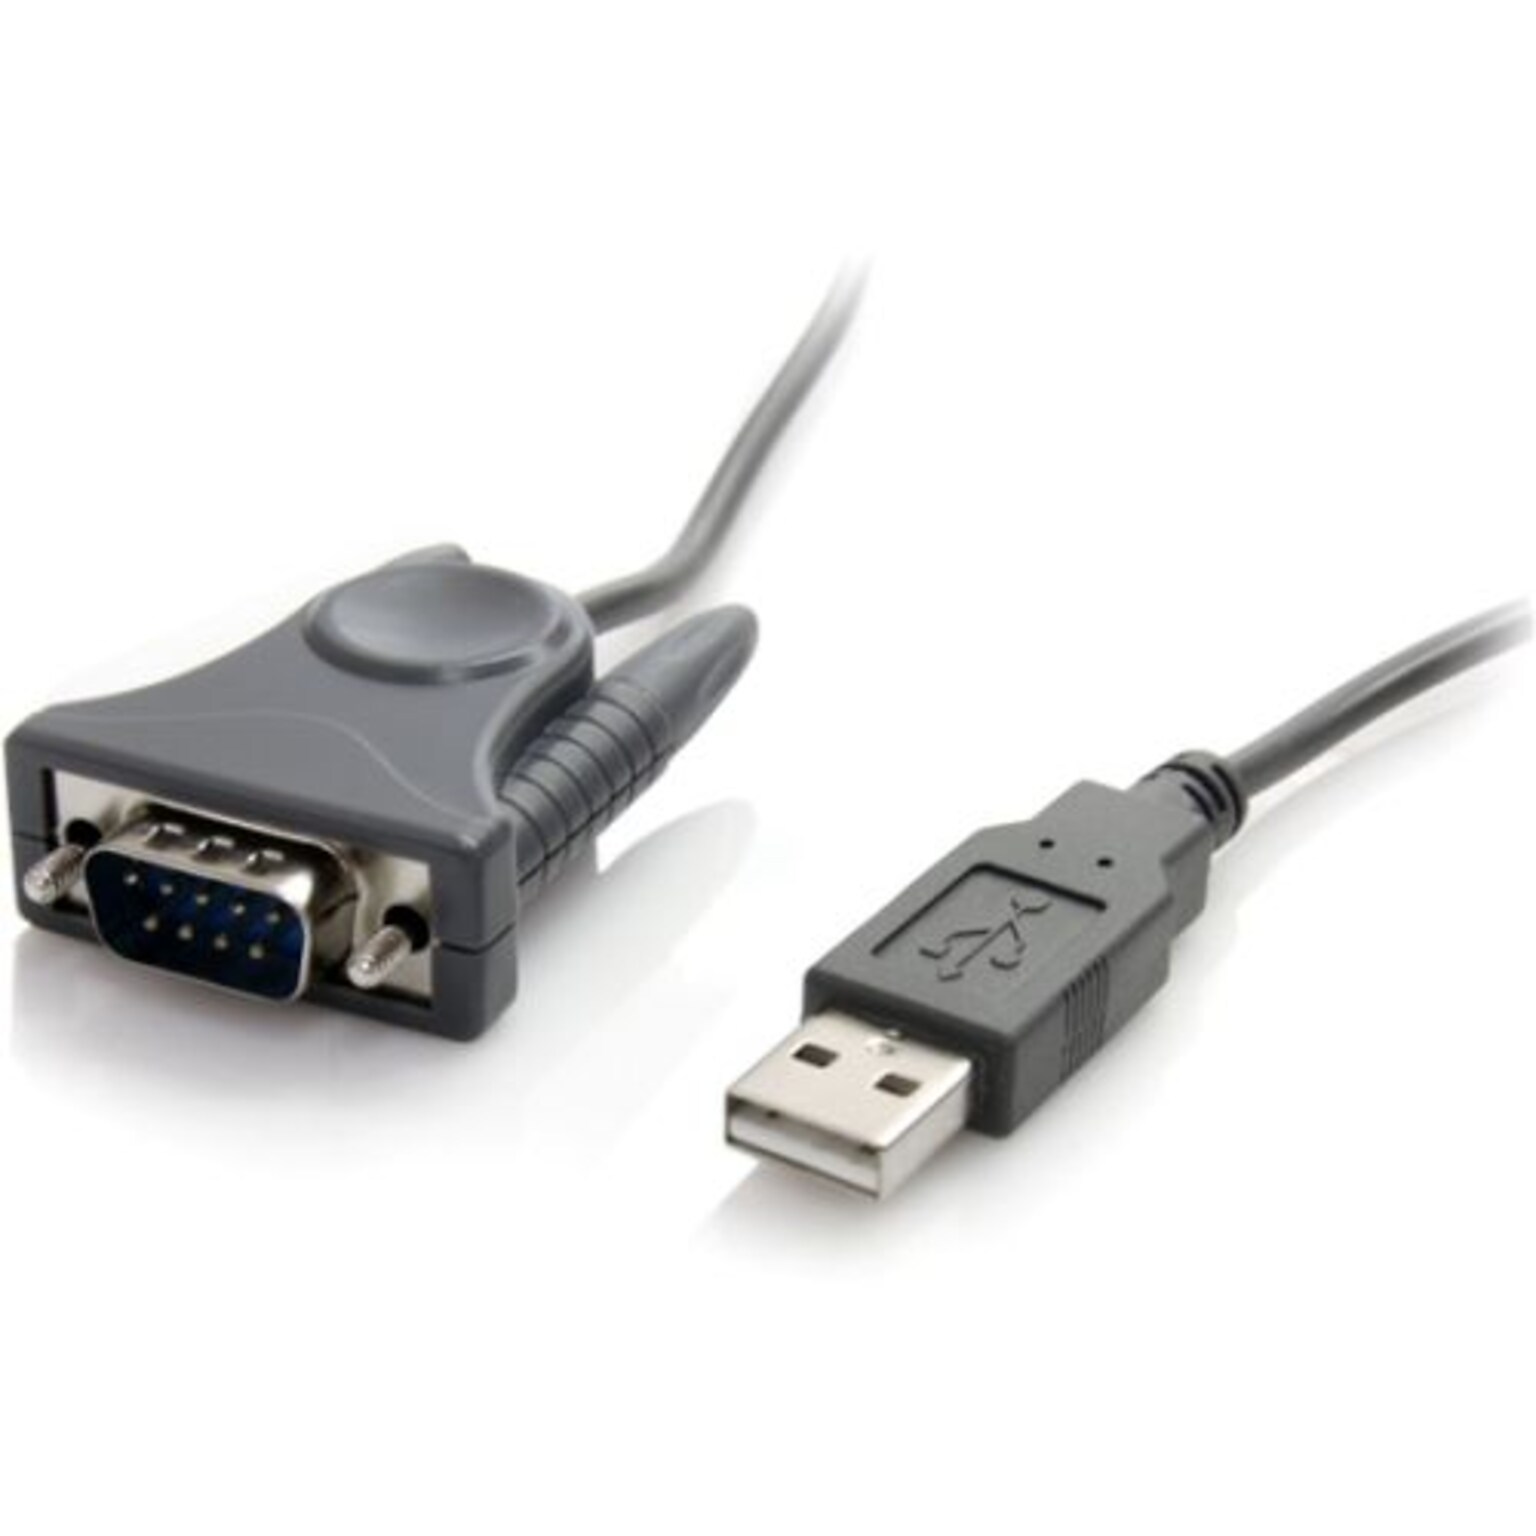 Startech ICUSB232DB25 USB To RS232 DB9/DB25 Serial Adapter Cable